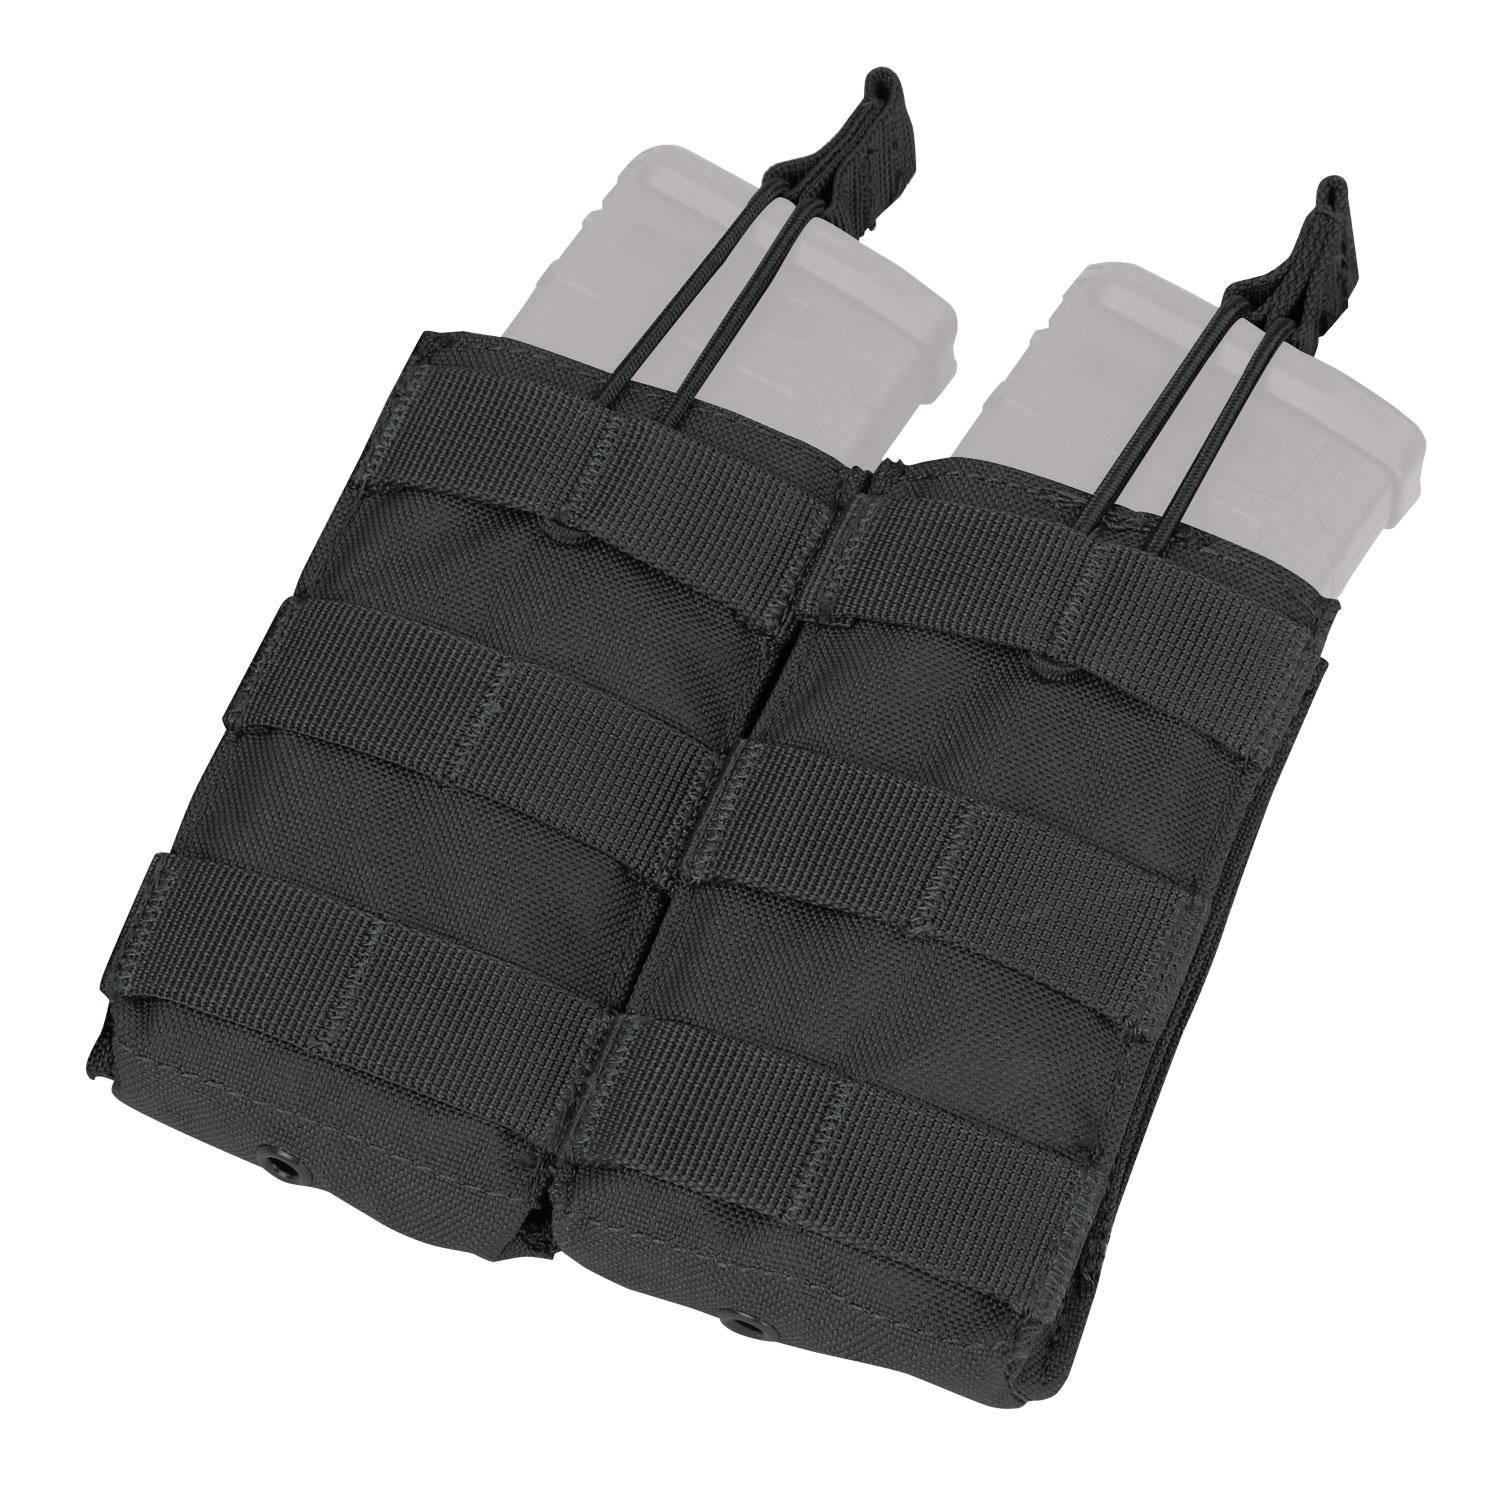 CONDOR DOUBLE OPEN-TOP M4/M16 MAG POUCH